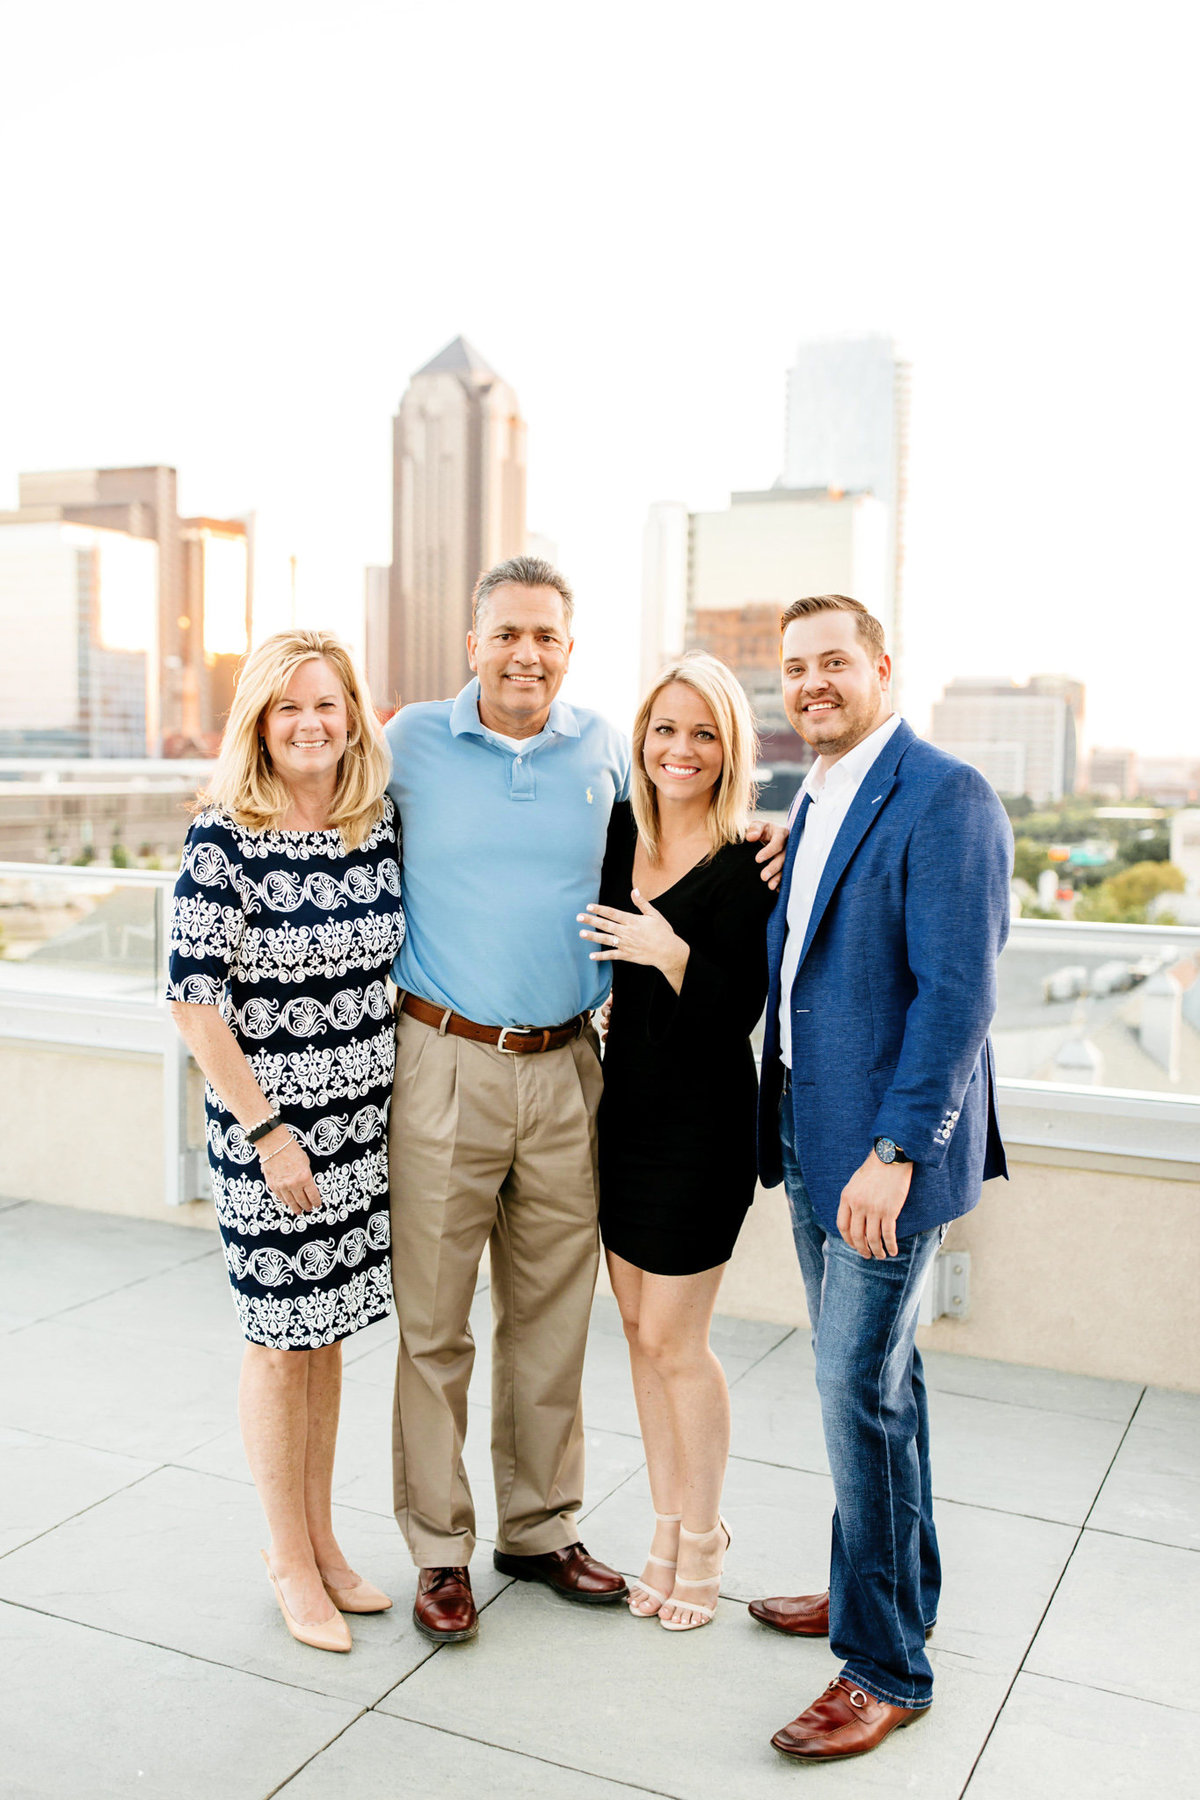 Eric & Megan - Downtown Dallas Rooftop Proposal & Engagement Session-151